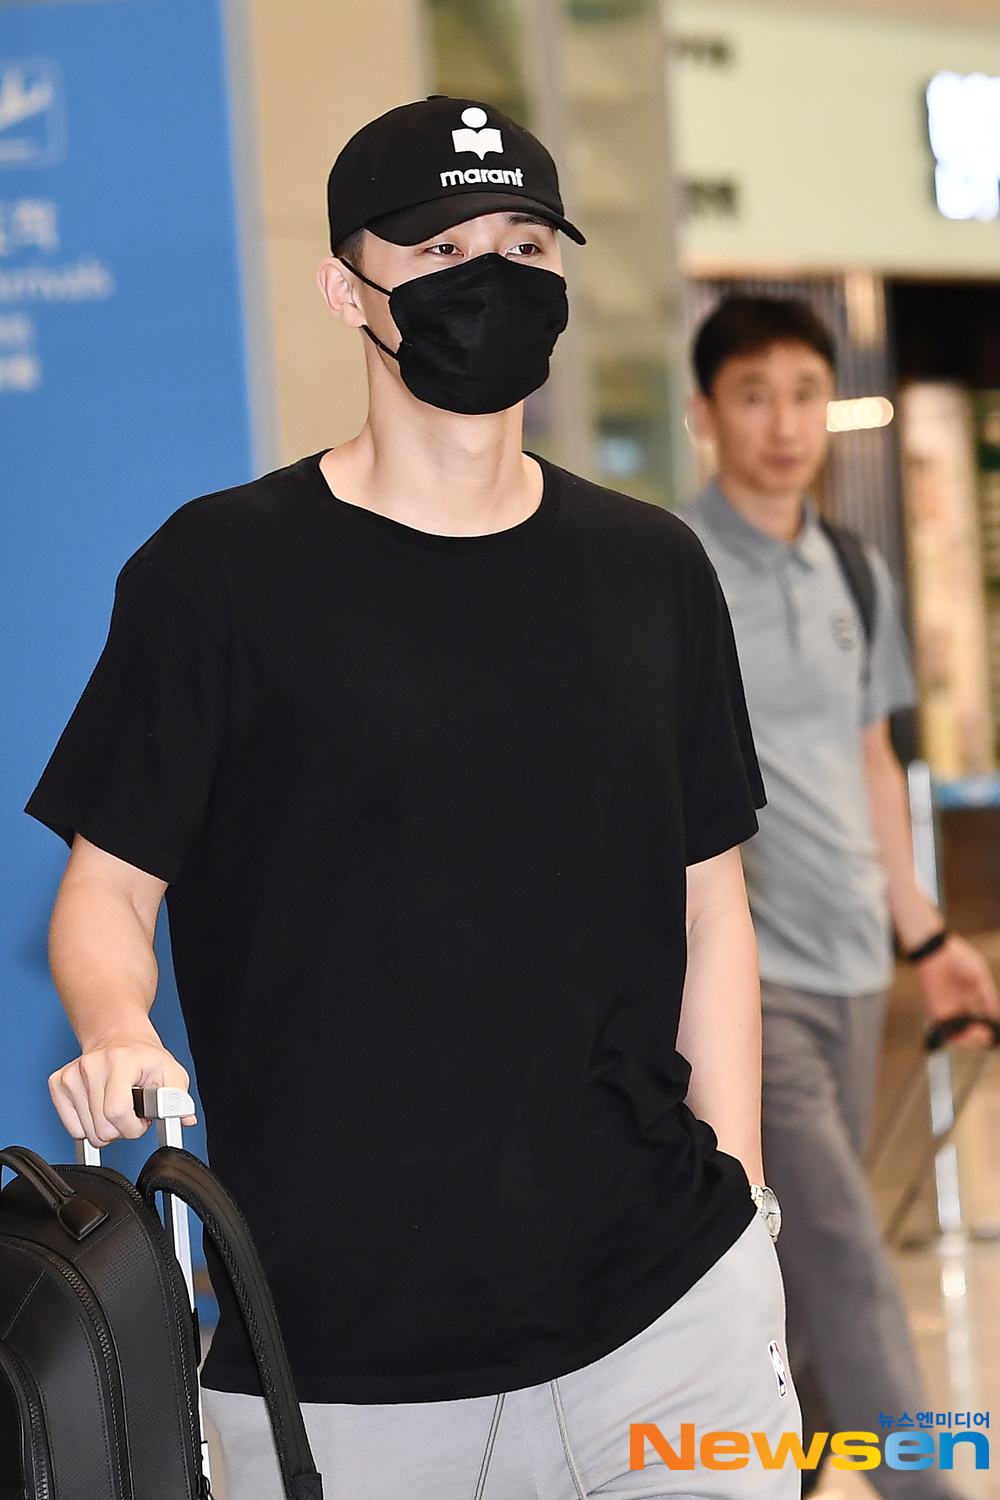 Actor Park Seo-joon arrives in Taiwan after completing an overseas promotion schedule held in Taiwan through Incheon International Airport in Unseo-dong, Jung-gu, Incheon, on the afternoon of August 30.exponential earthquake